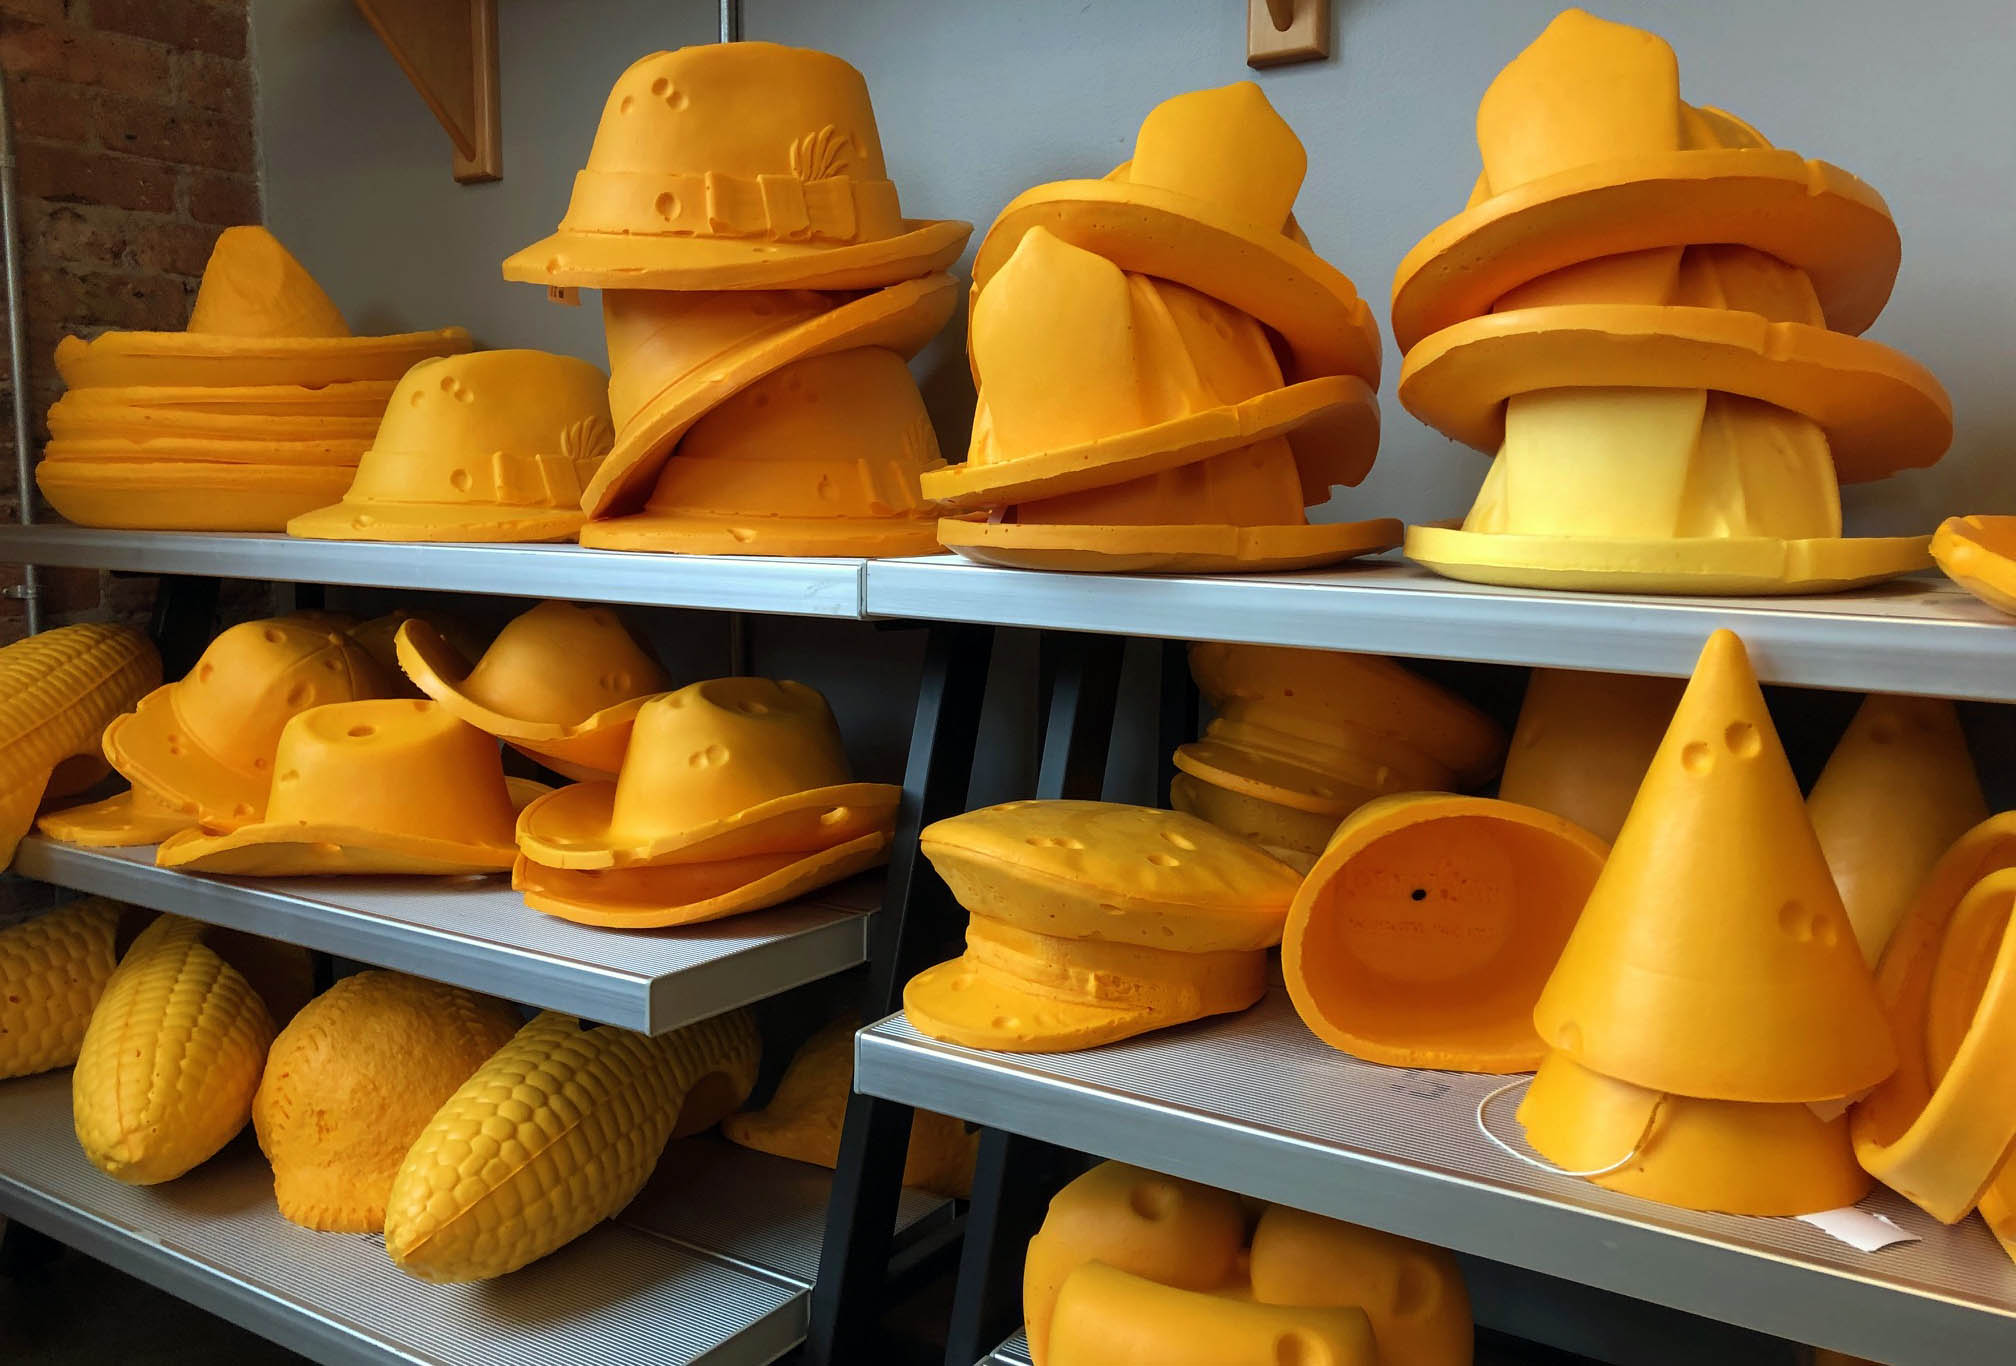 Different types of finished cheeseheads